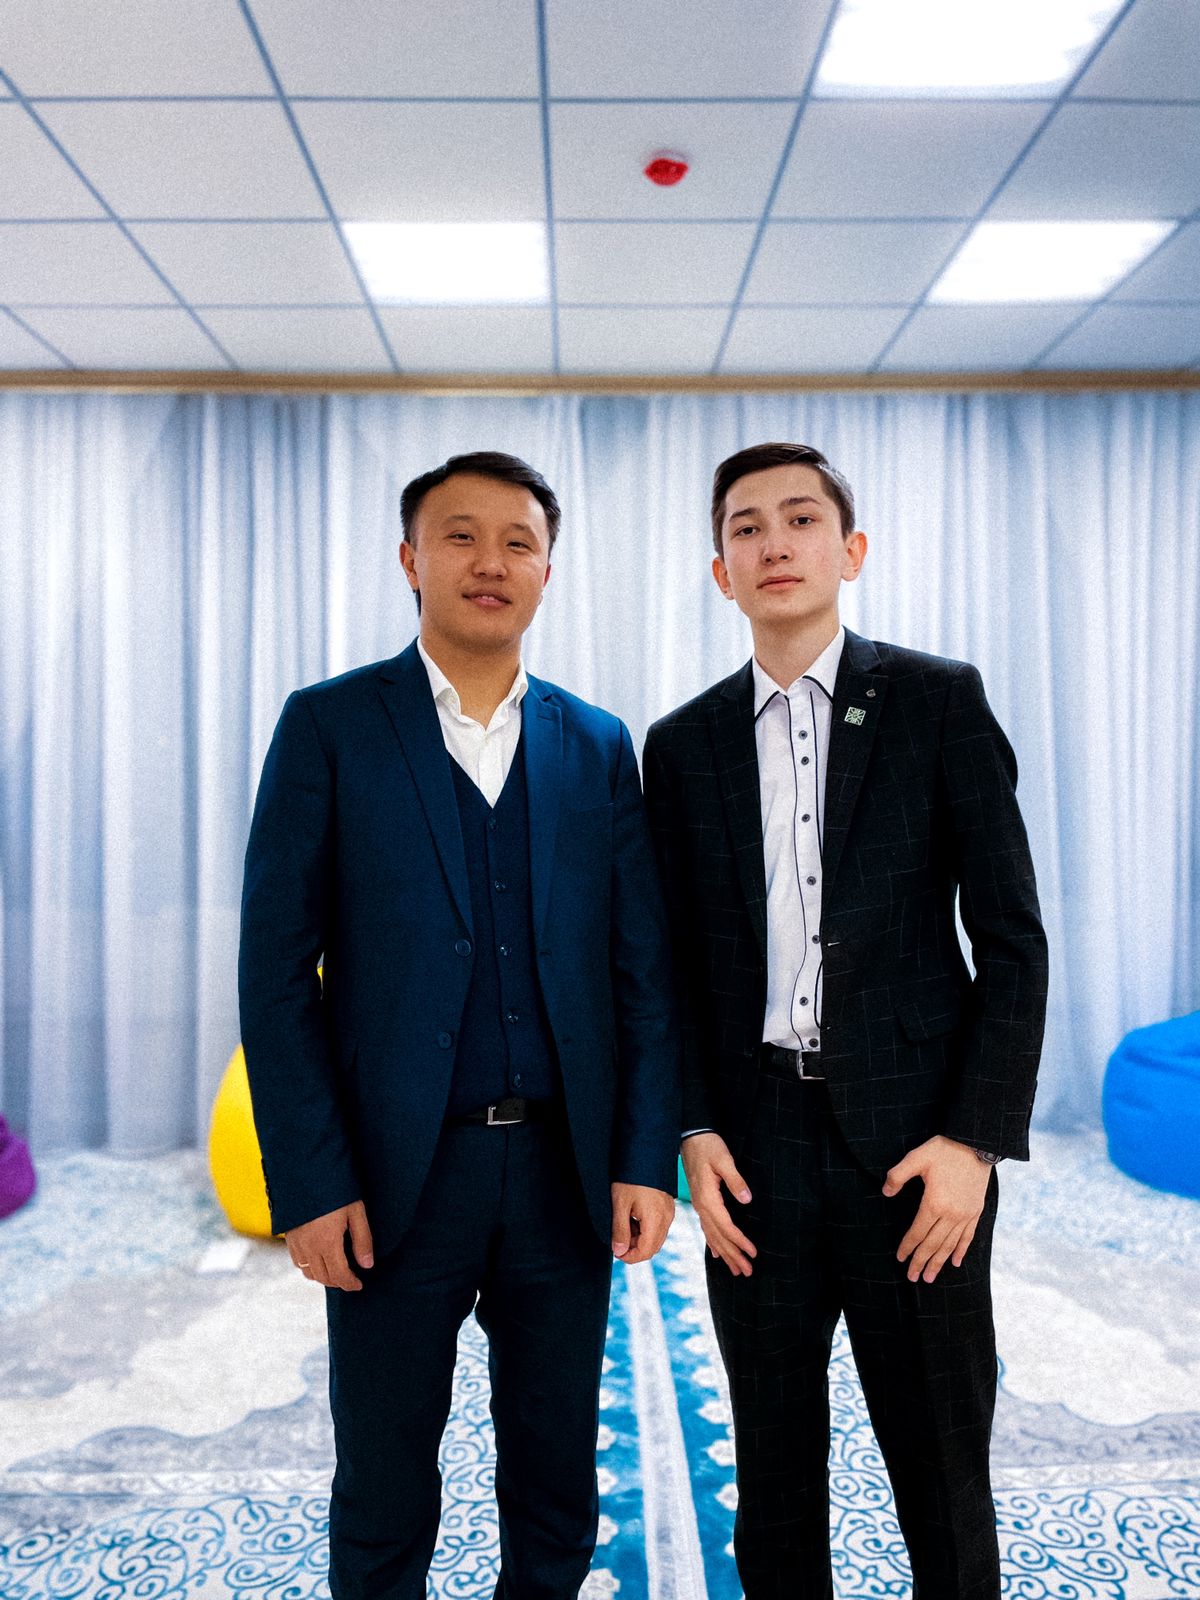 Meeting with the head of the Youth Policy Department of the Karaganda region Birzhan Alimzhanov